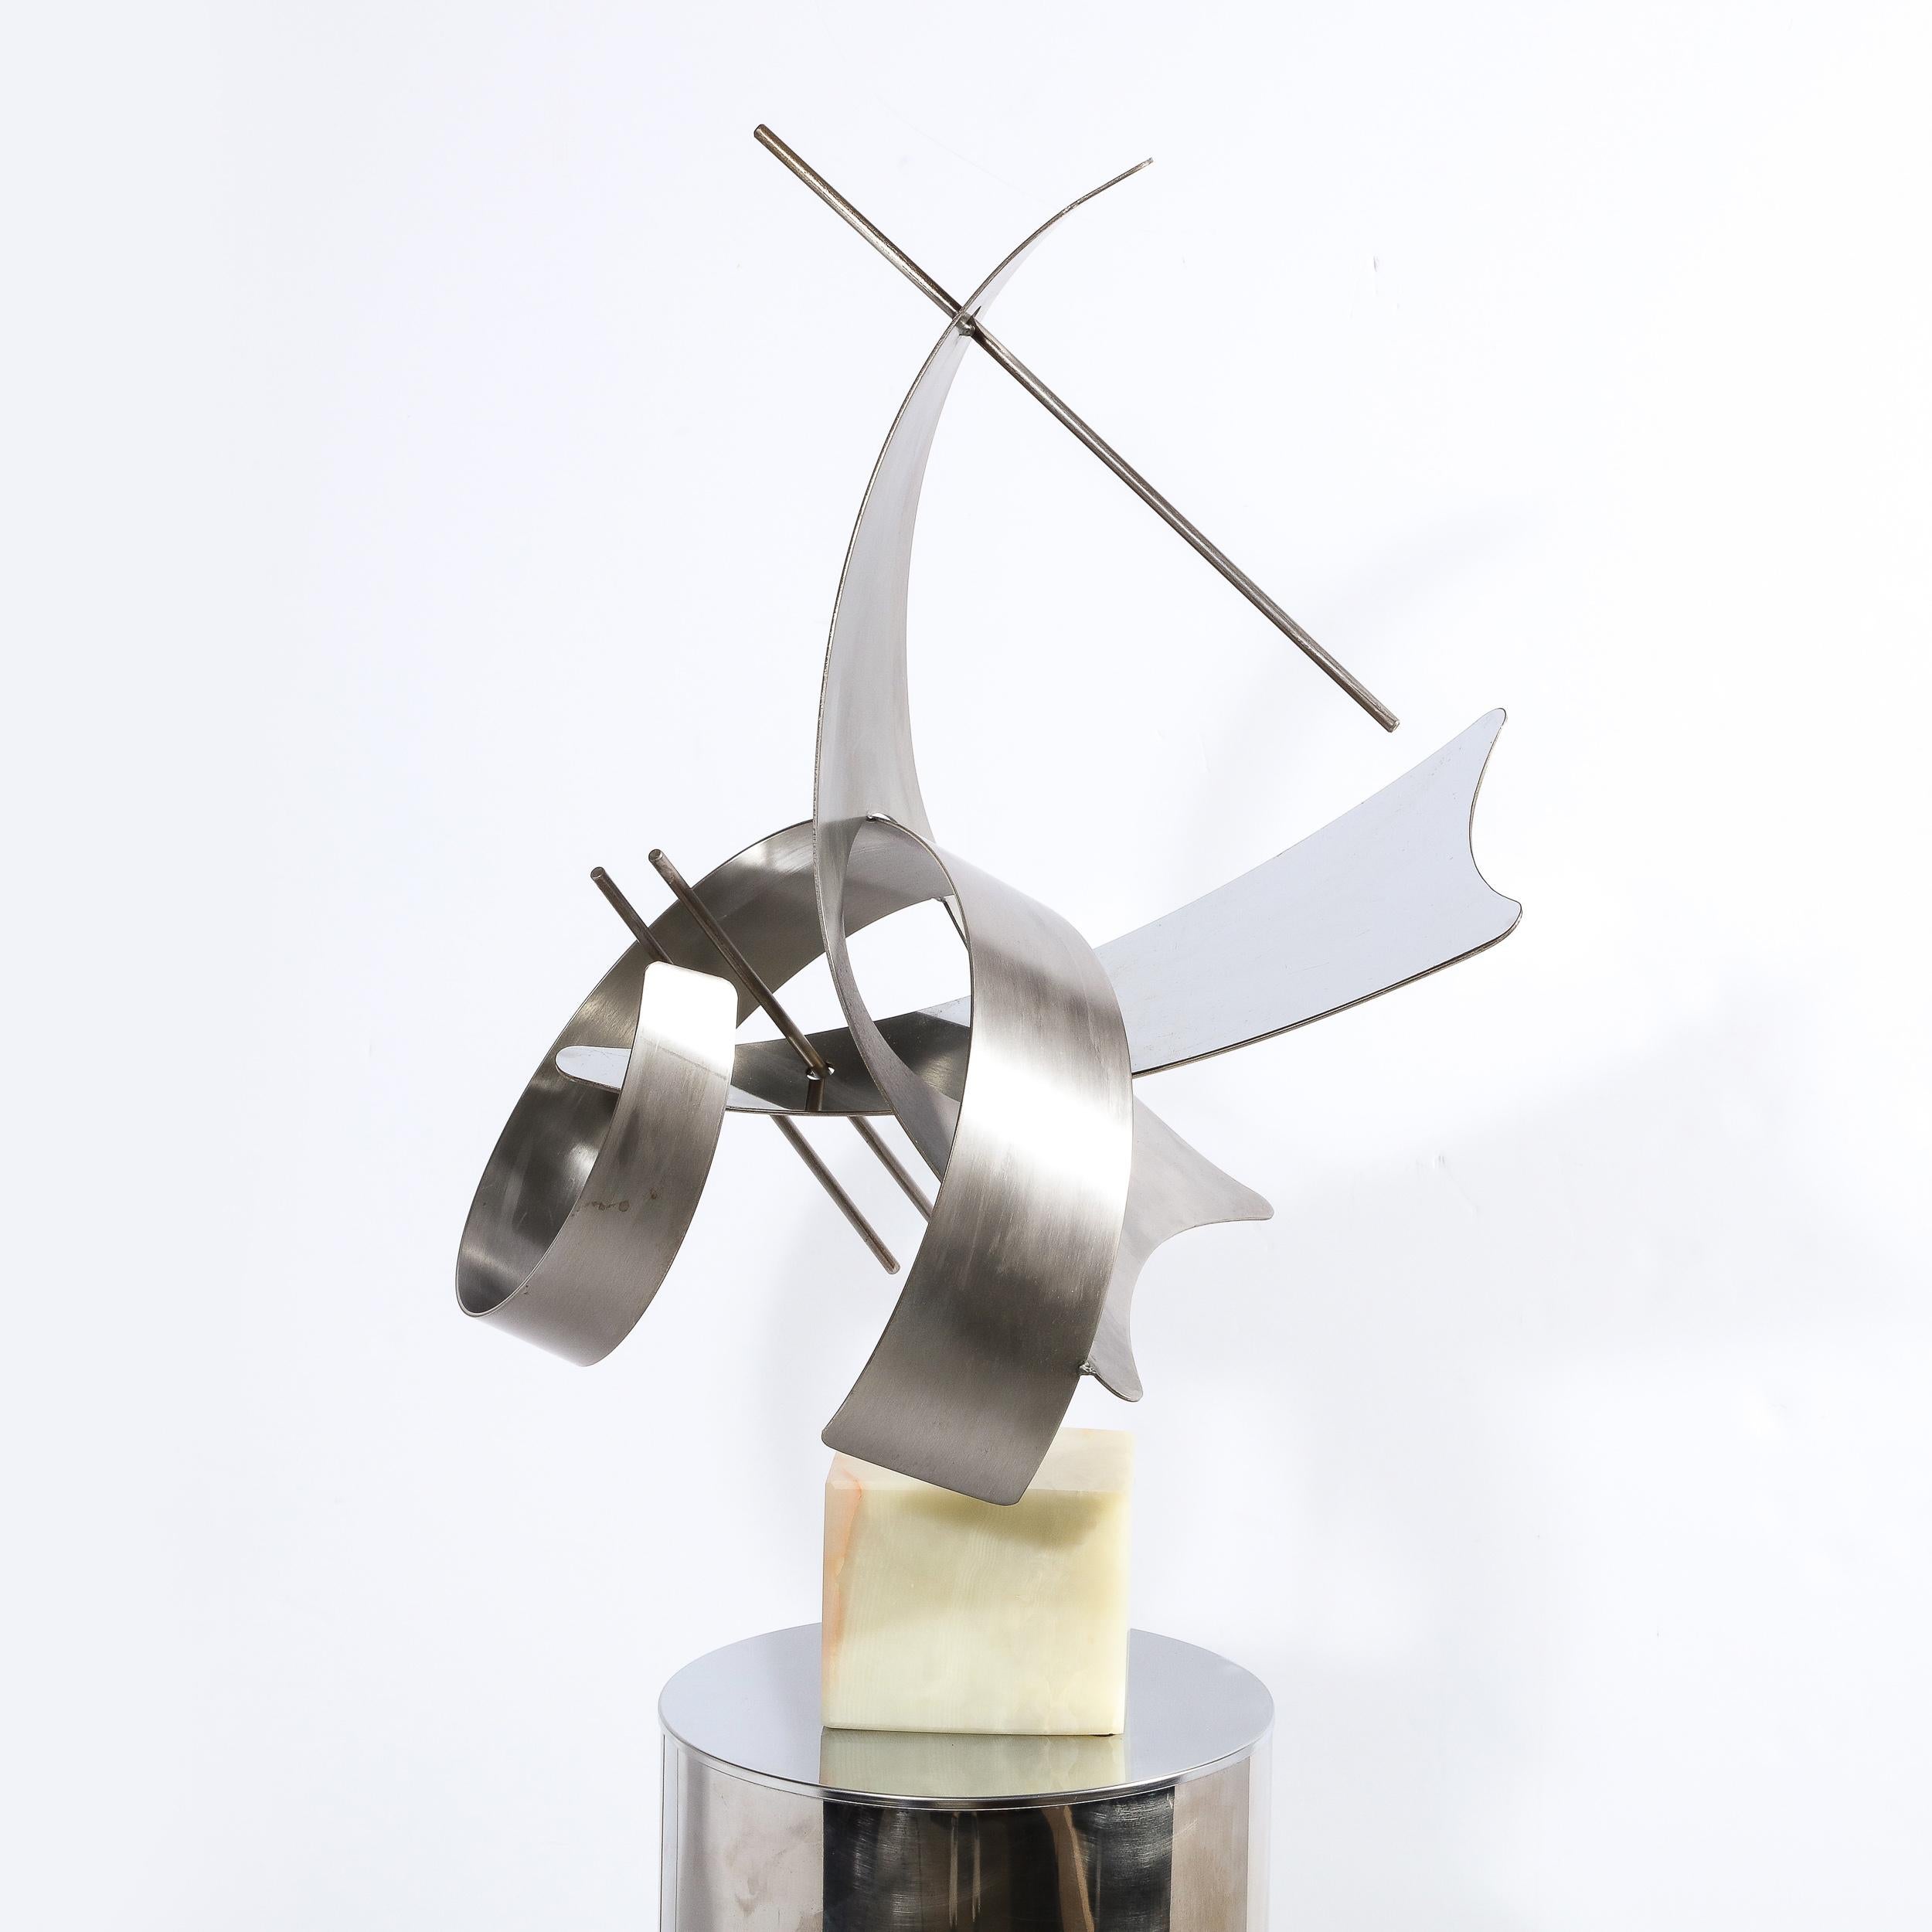 This sophisticated brushed aluminum modernist sculpture was realized in the United States in 1979. Created by an unheralded, but masterful artist, and signed Curtis J, the piece suggests a deconstructed Kandinsky painting rendered in three